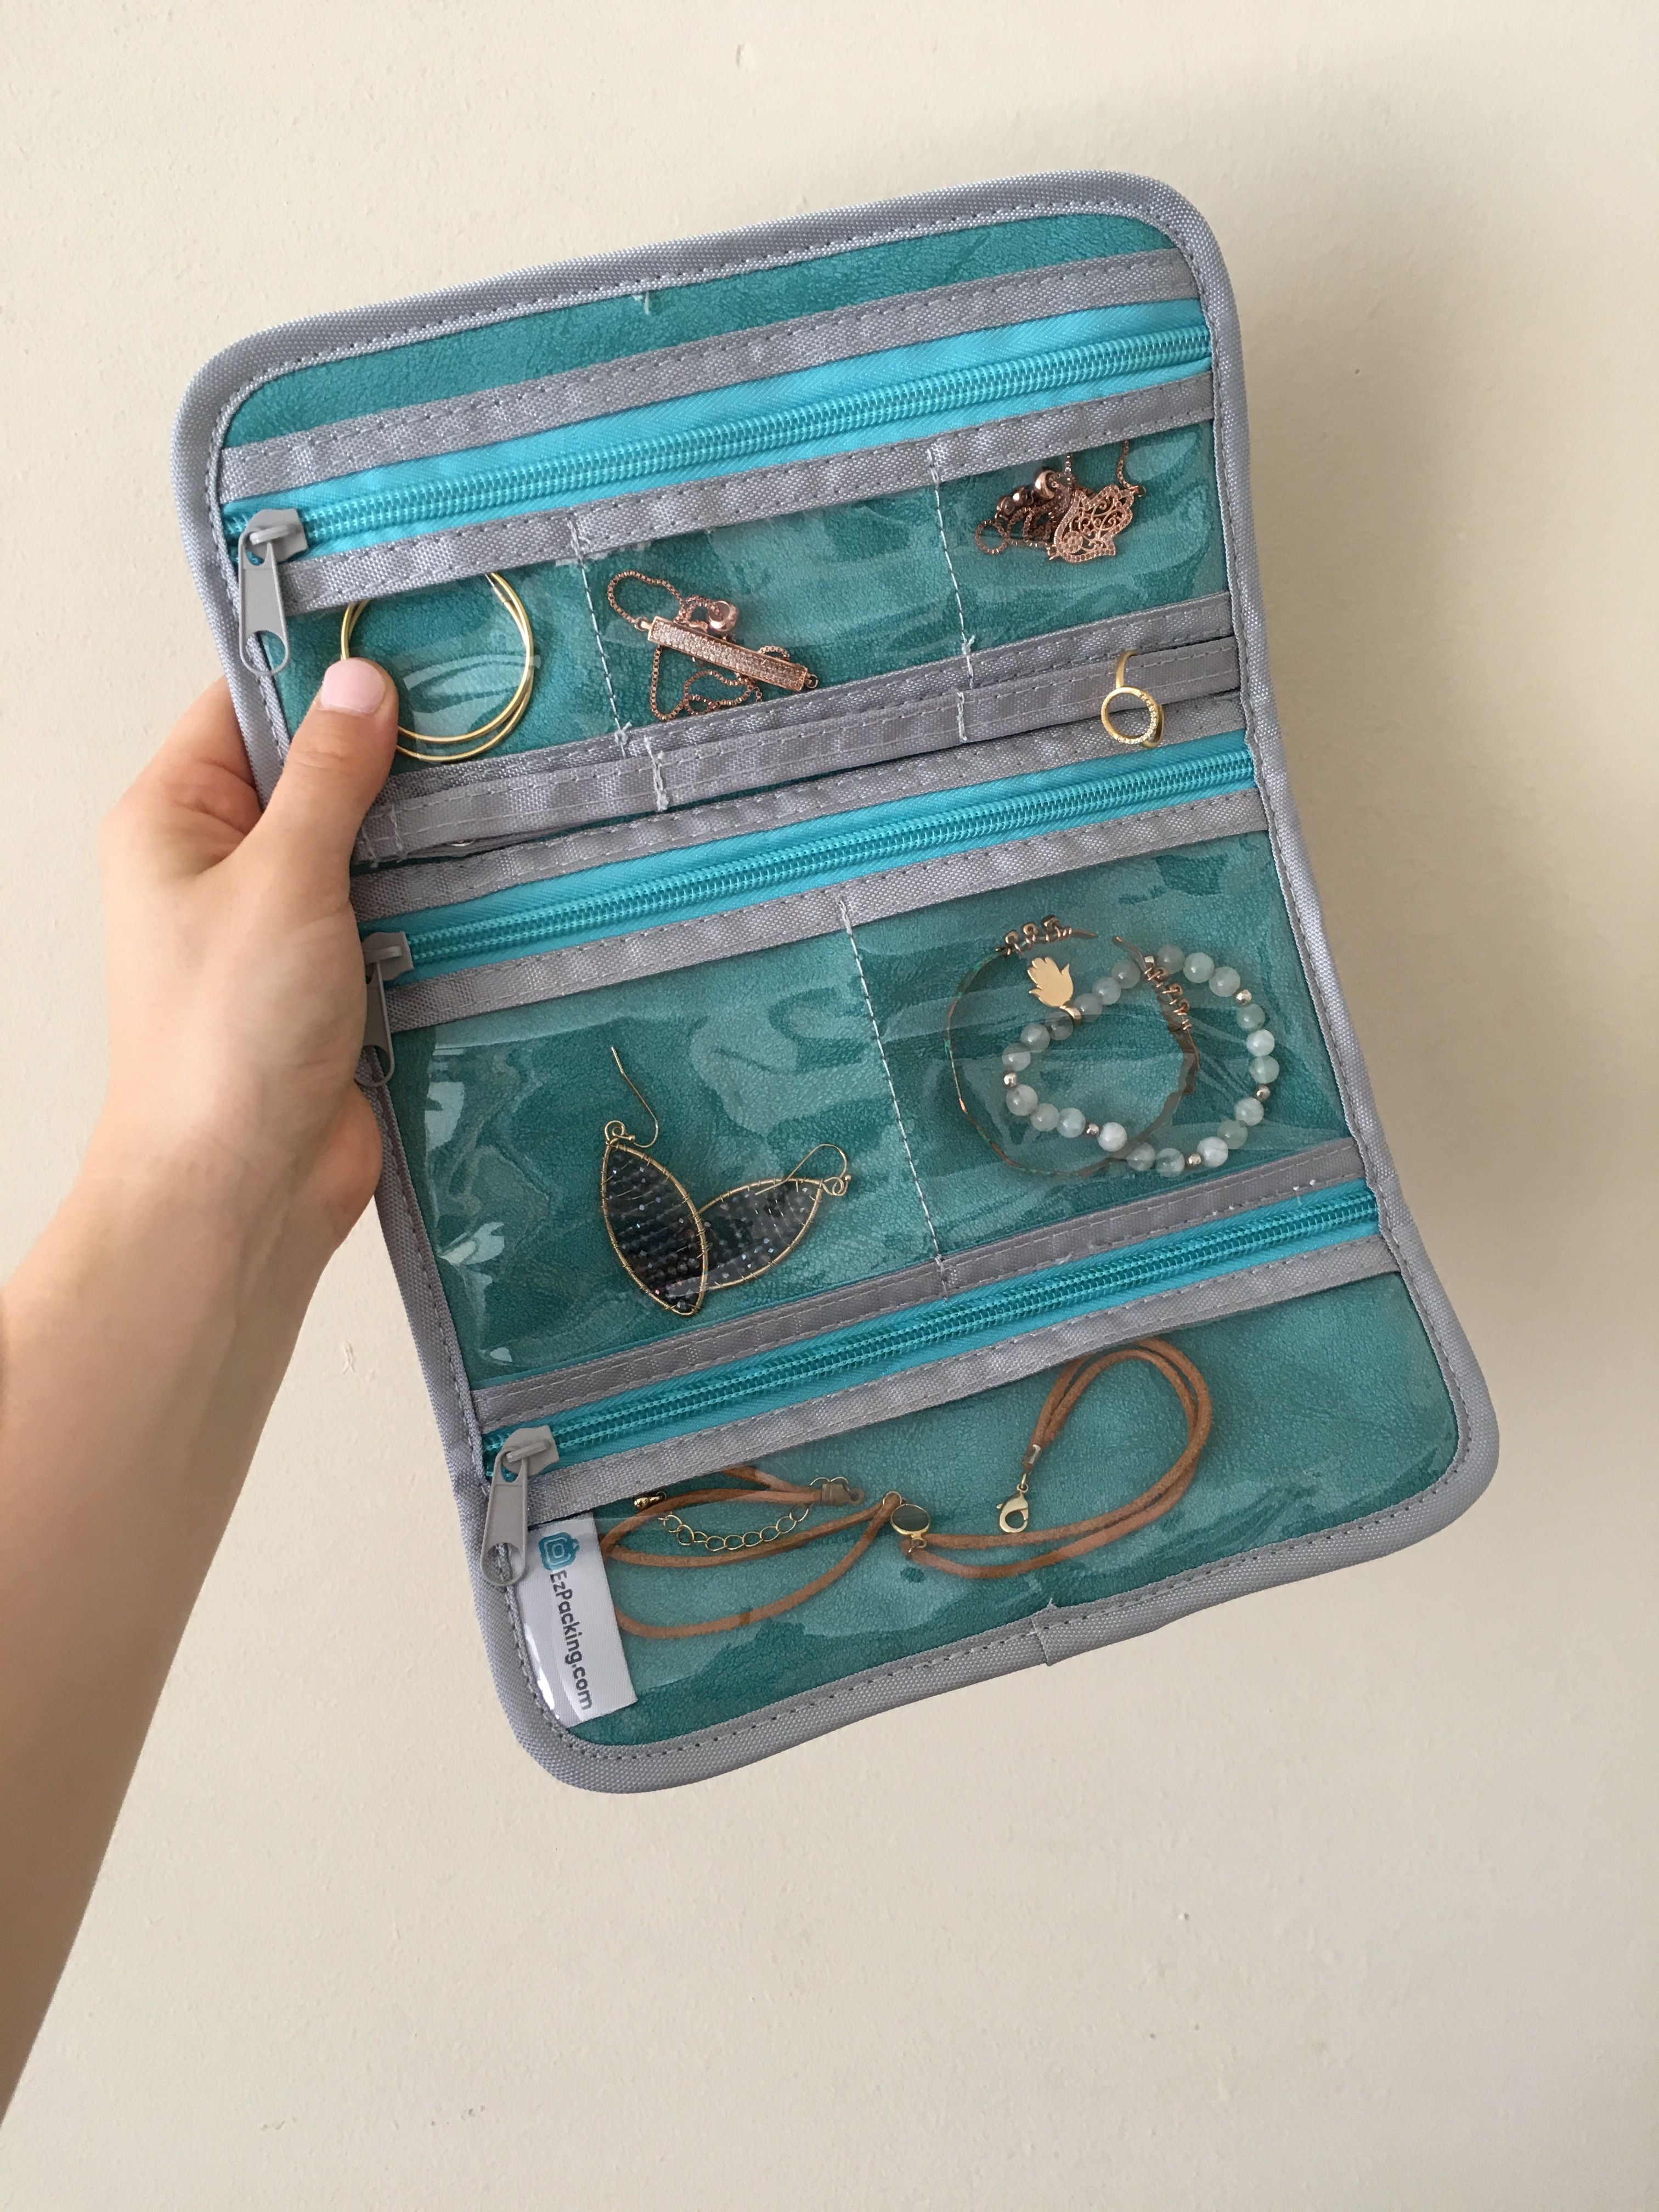 Accessories organized in a travel jewelry roll